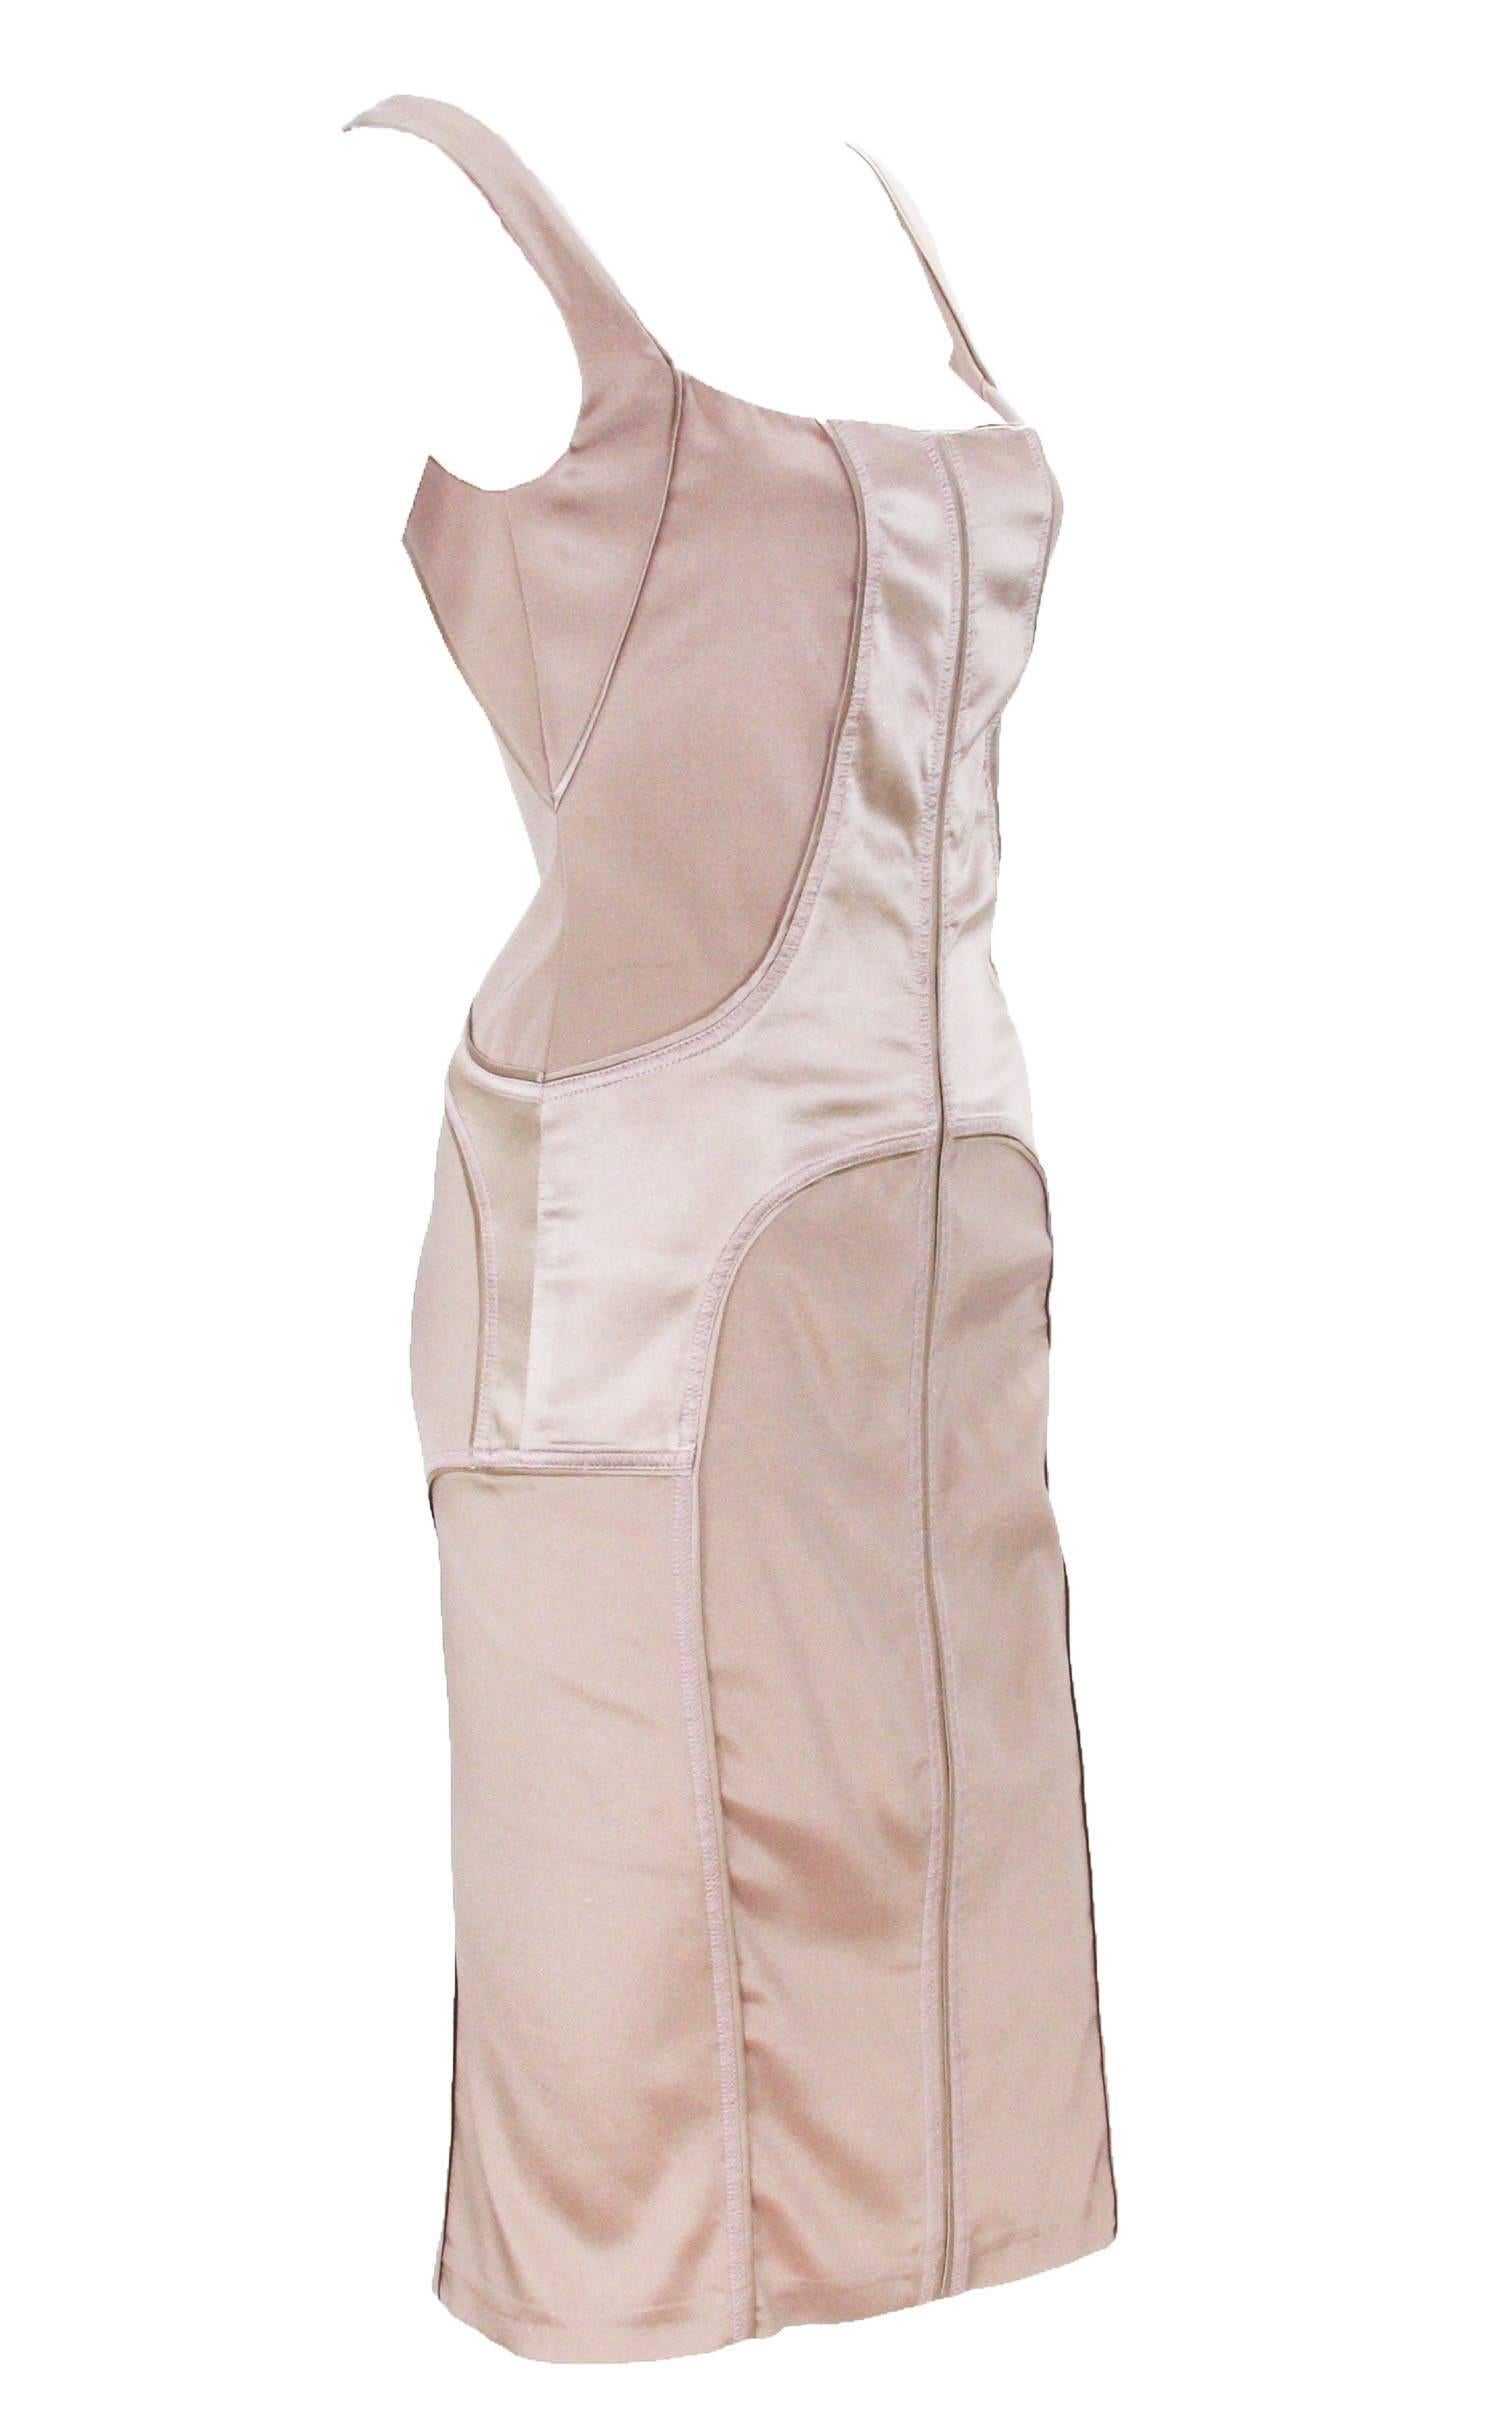 Tom Ford for Gucci Nude Bandage Cocktail Dress
Italian size 38 - US 4
2003 Collection
Nude Stretchy Sexy Bandage Dress
Side Zip Closure
71% Silk, 20% Nylon, 9% Spandex
Made in Italy
Excellent Condition